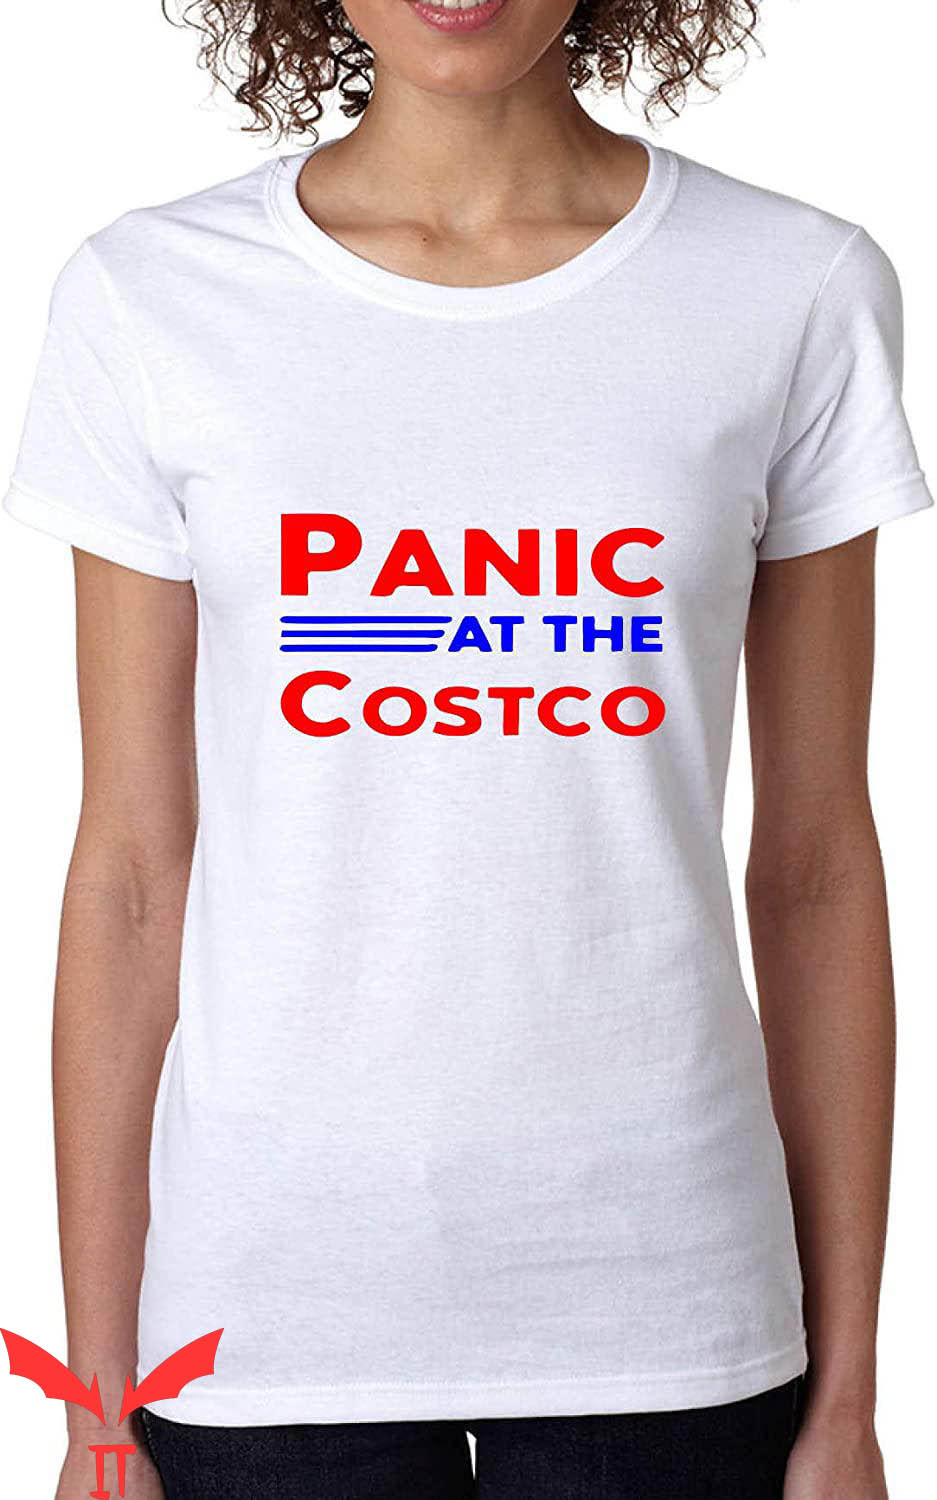 Panic At The Costco T-Shirt Cool Graphic Vintage Design